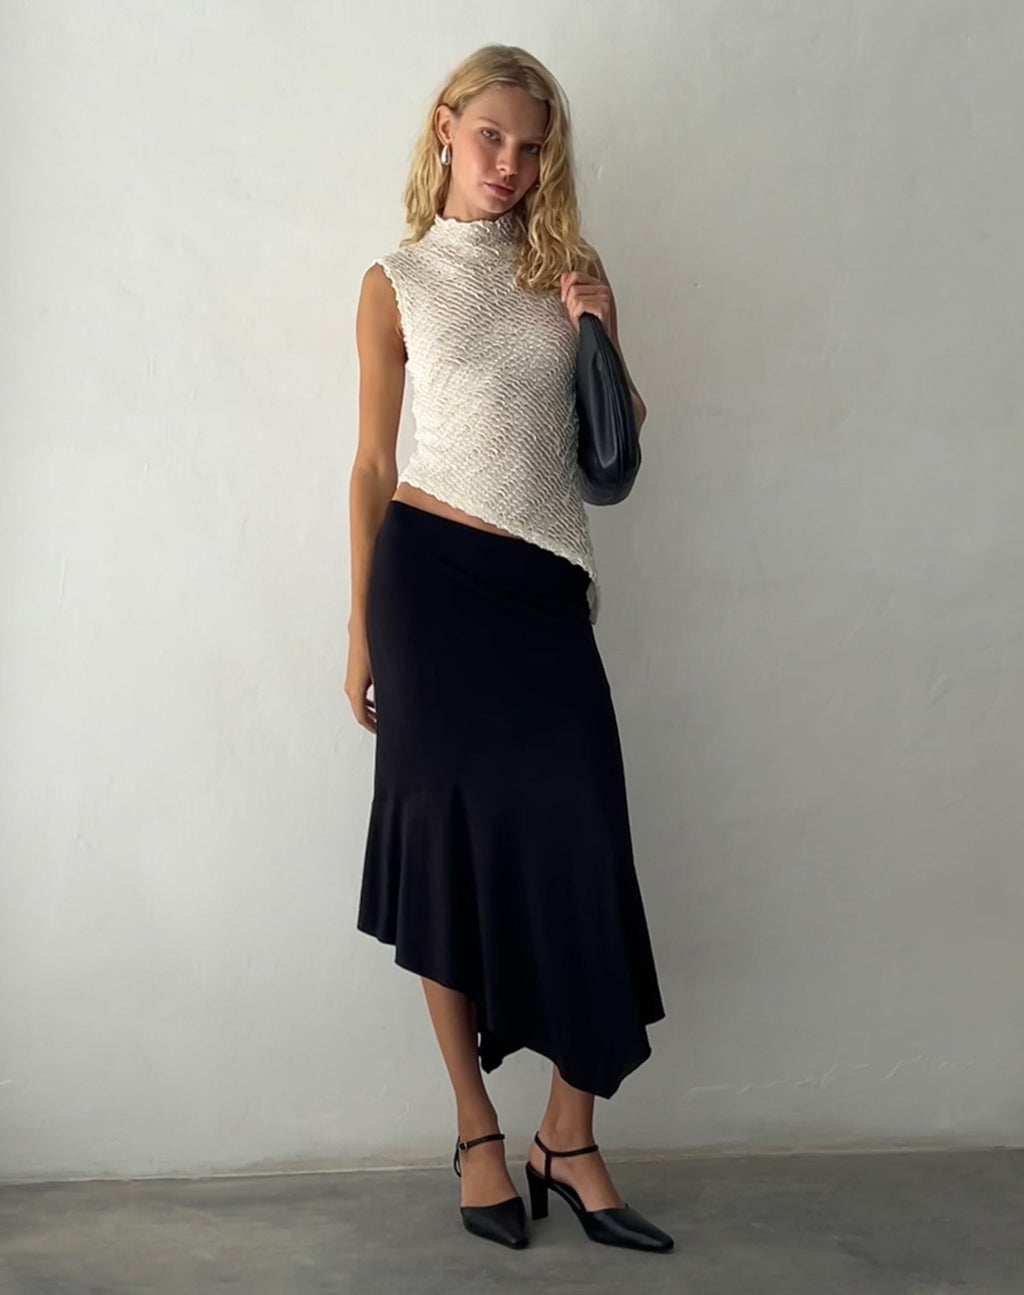 Ember Sleevless Top in Textured Ivory